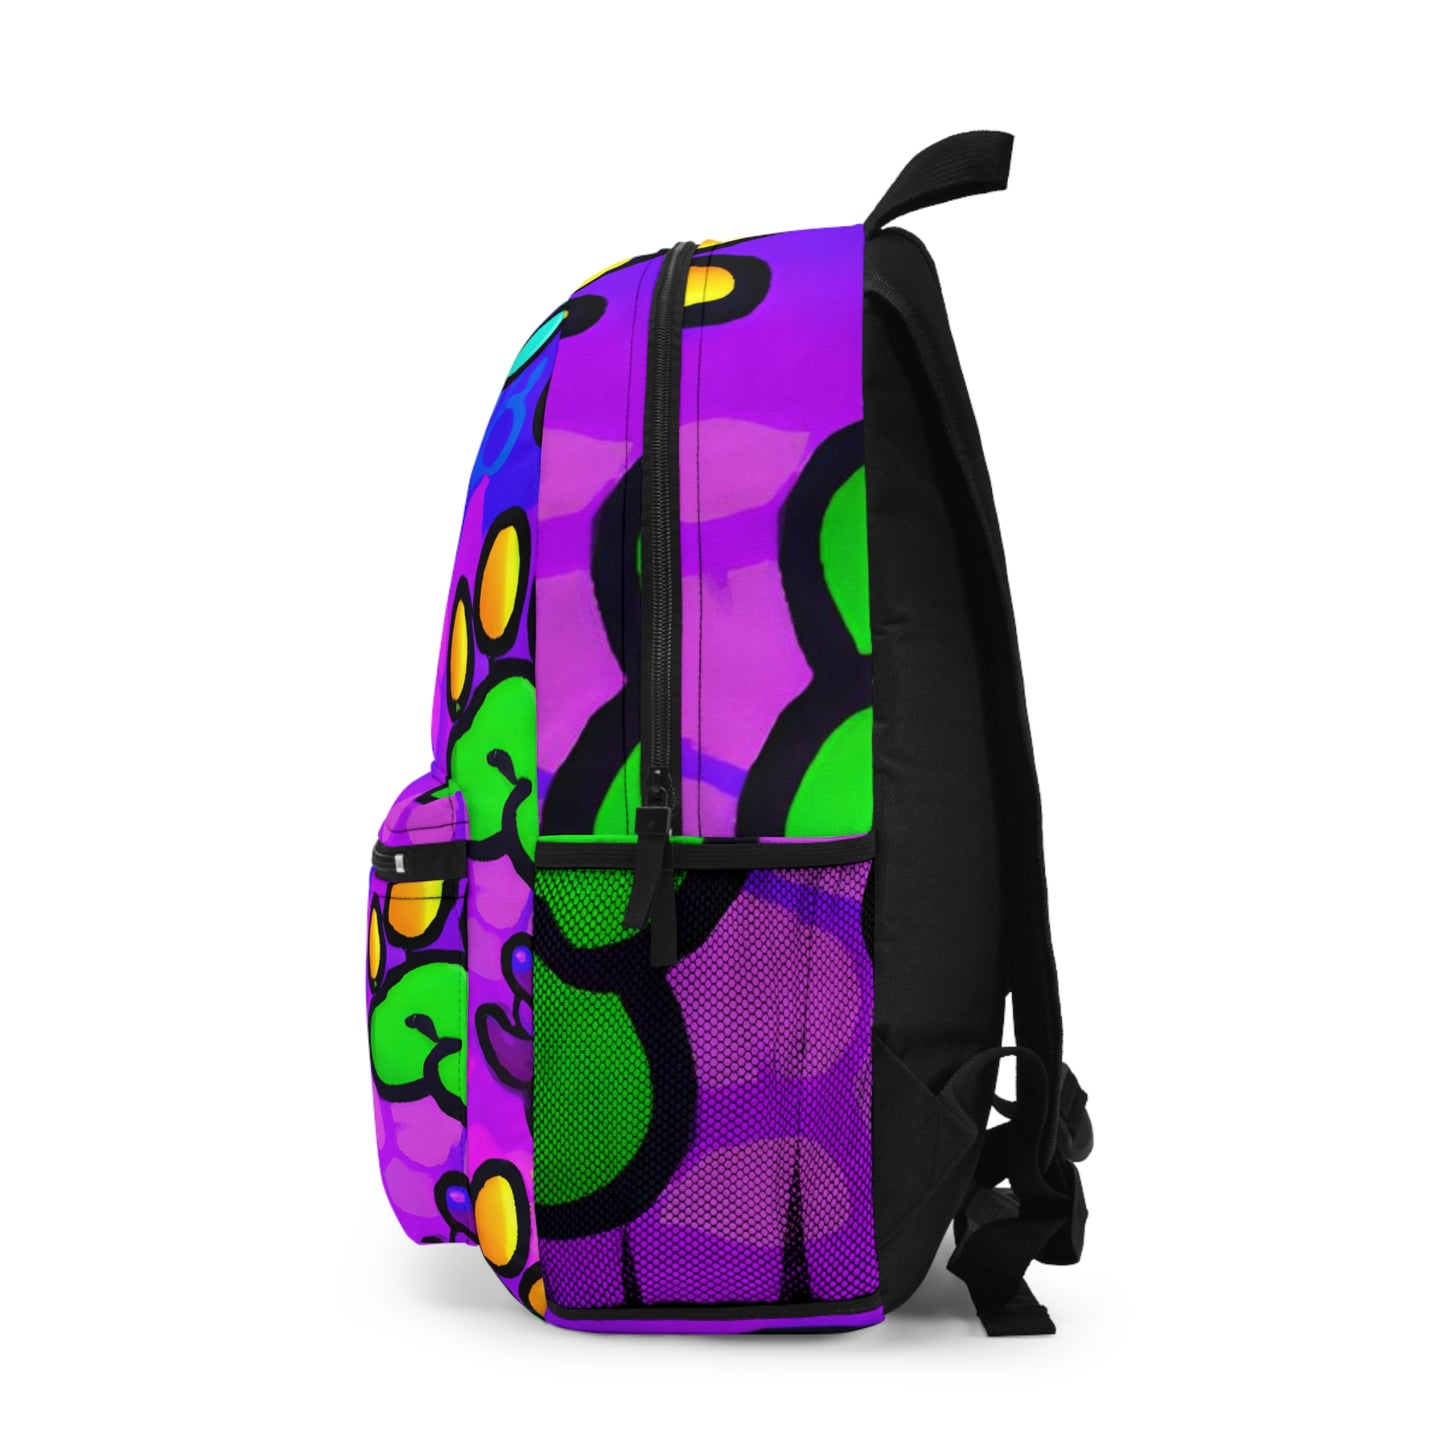 Le Swag du Sixties - Paw Print - Backpack